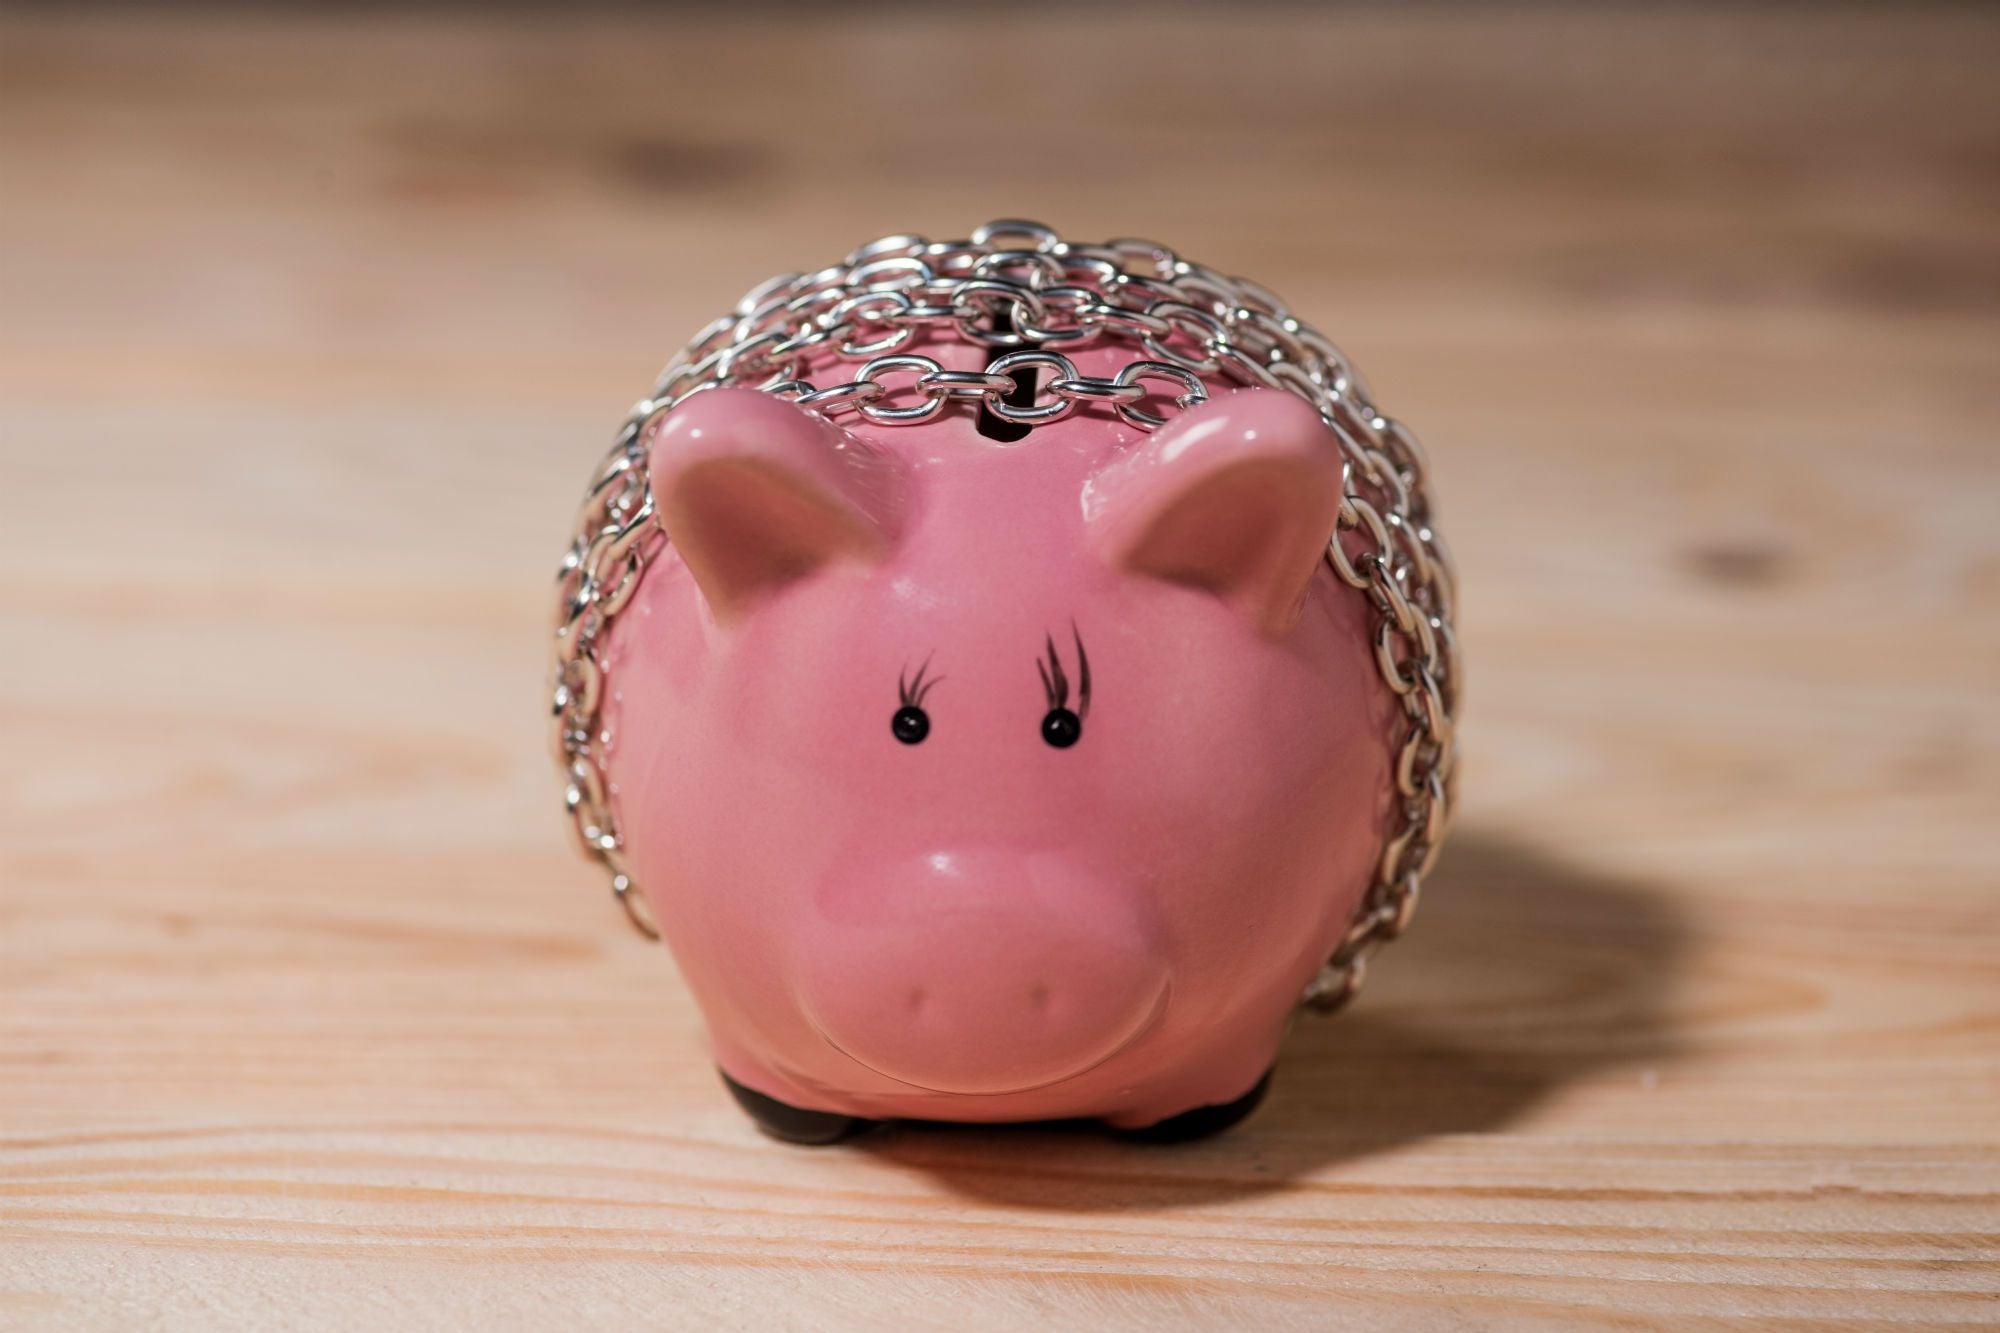 piggy bank chained with a chain